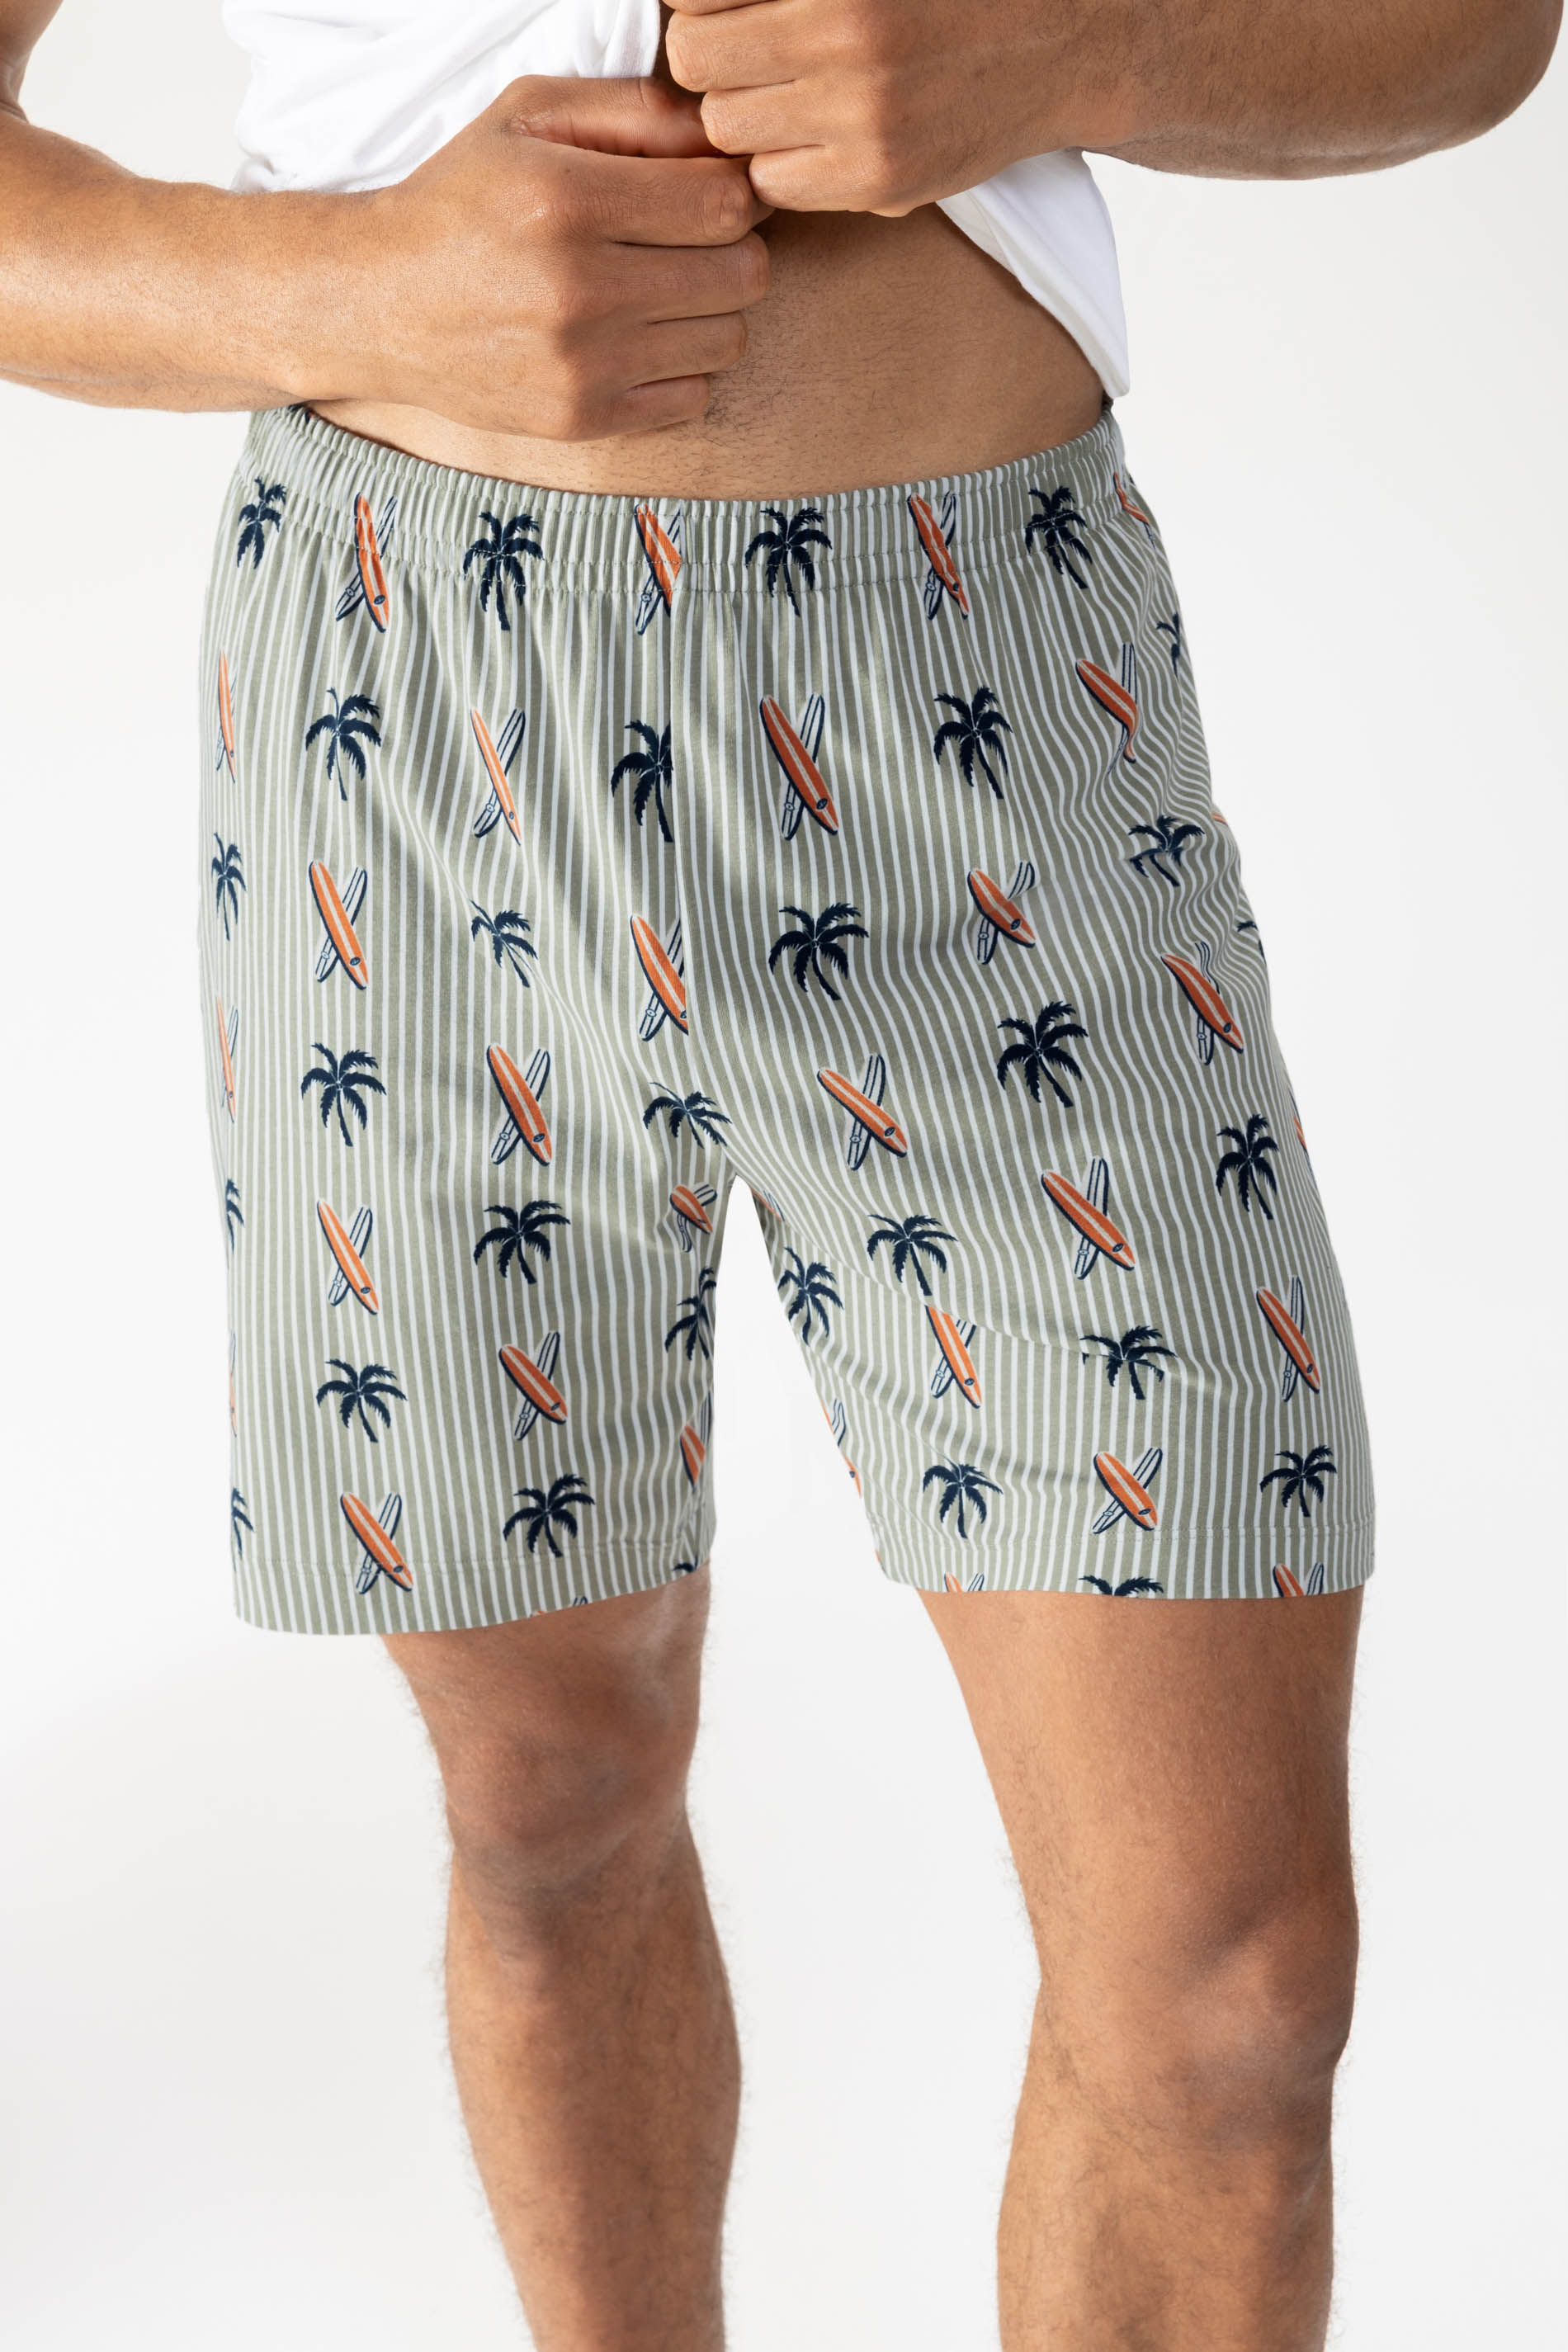 Bottoms Serie Palm Tree Detail View 01 | mey®